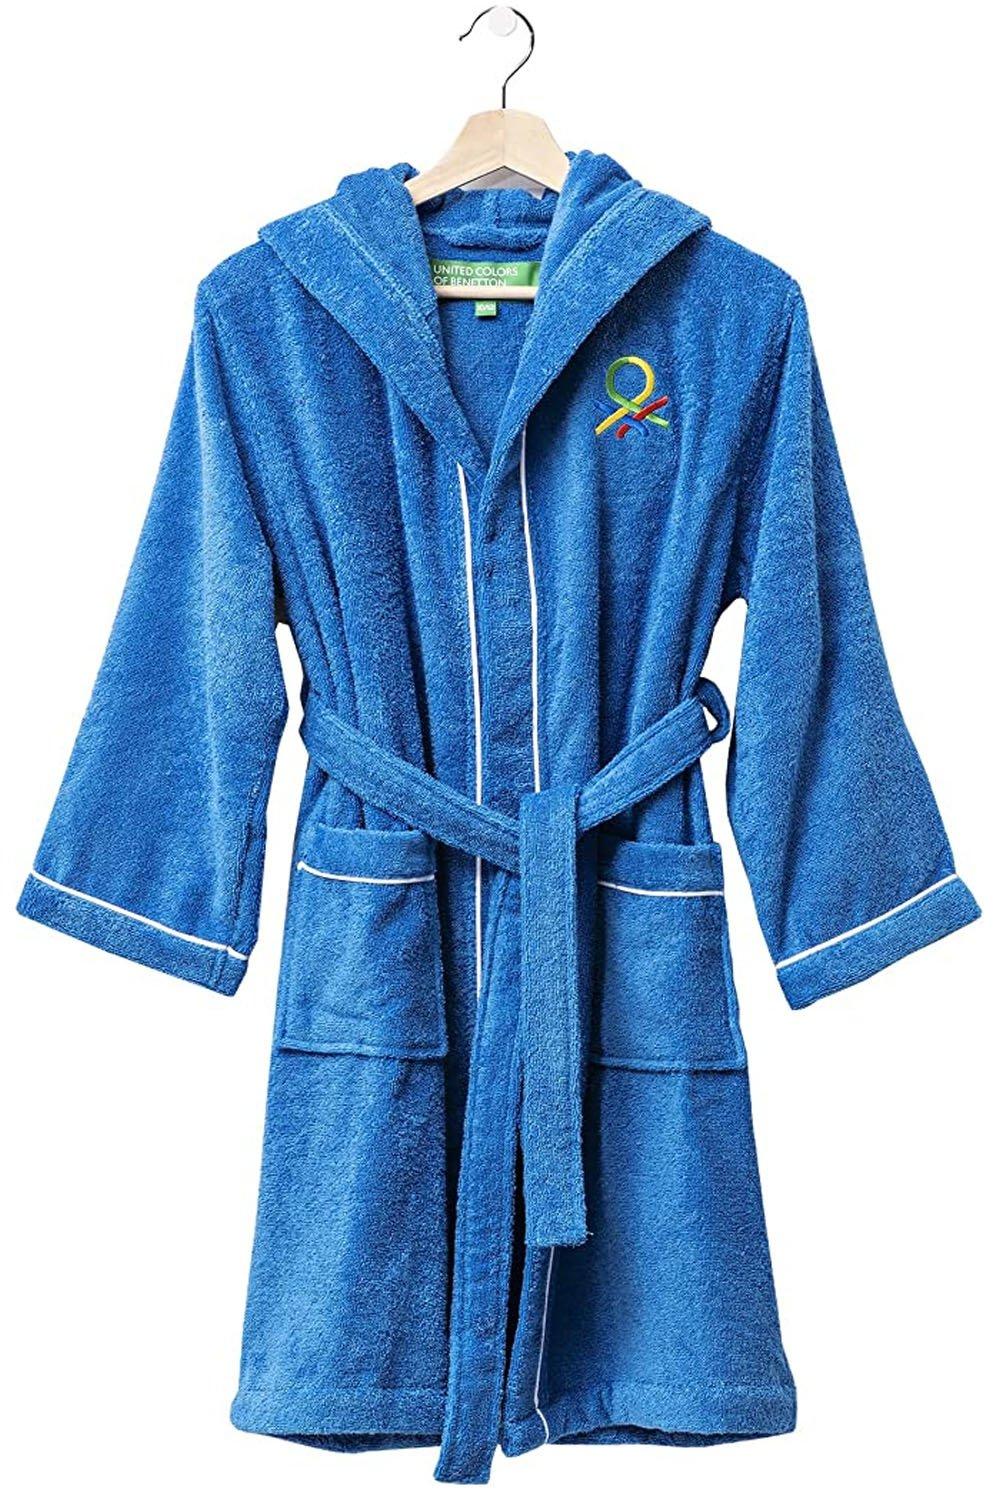 United Colors 100% Cotton Kids Bathrobe with Hoodie 10-12 Years Old Blue